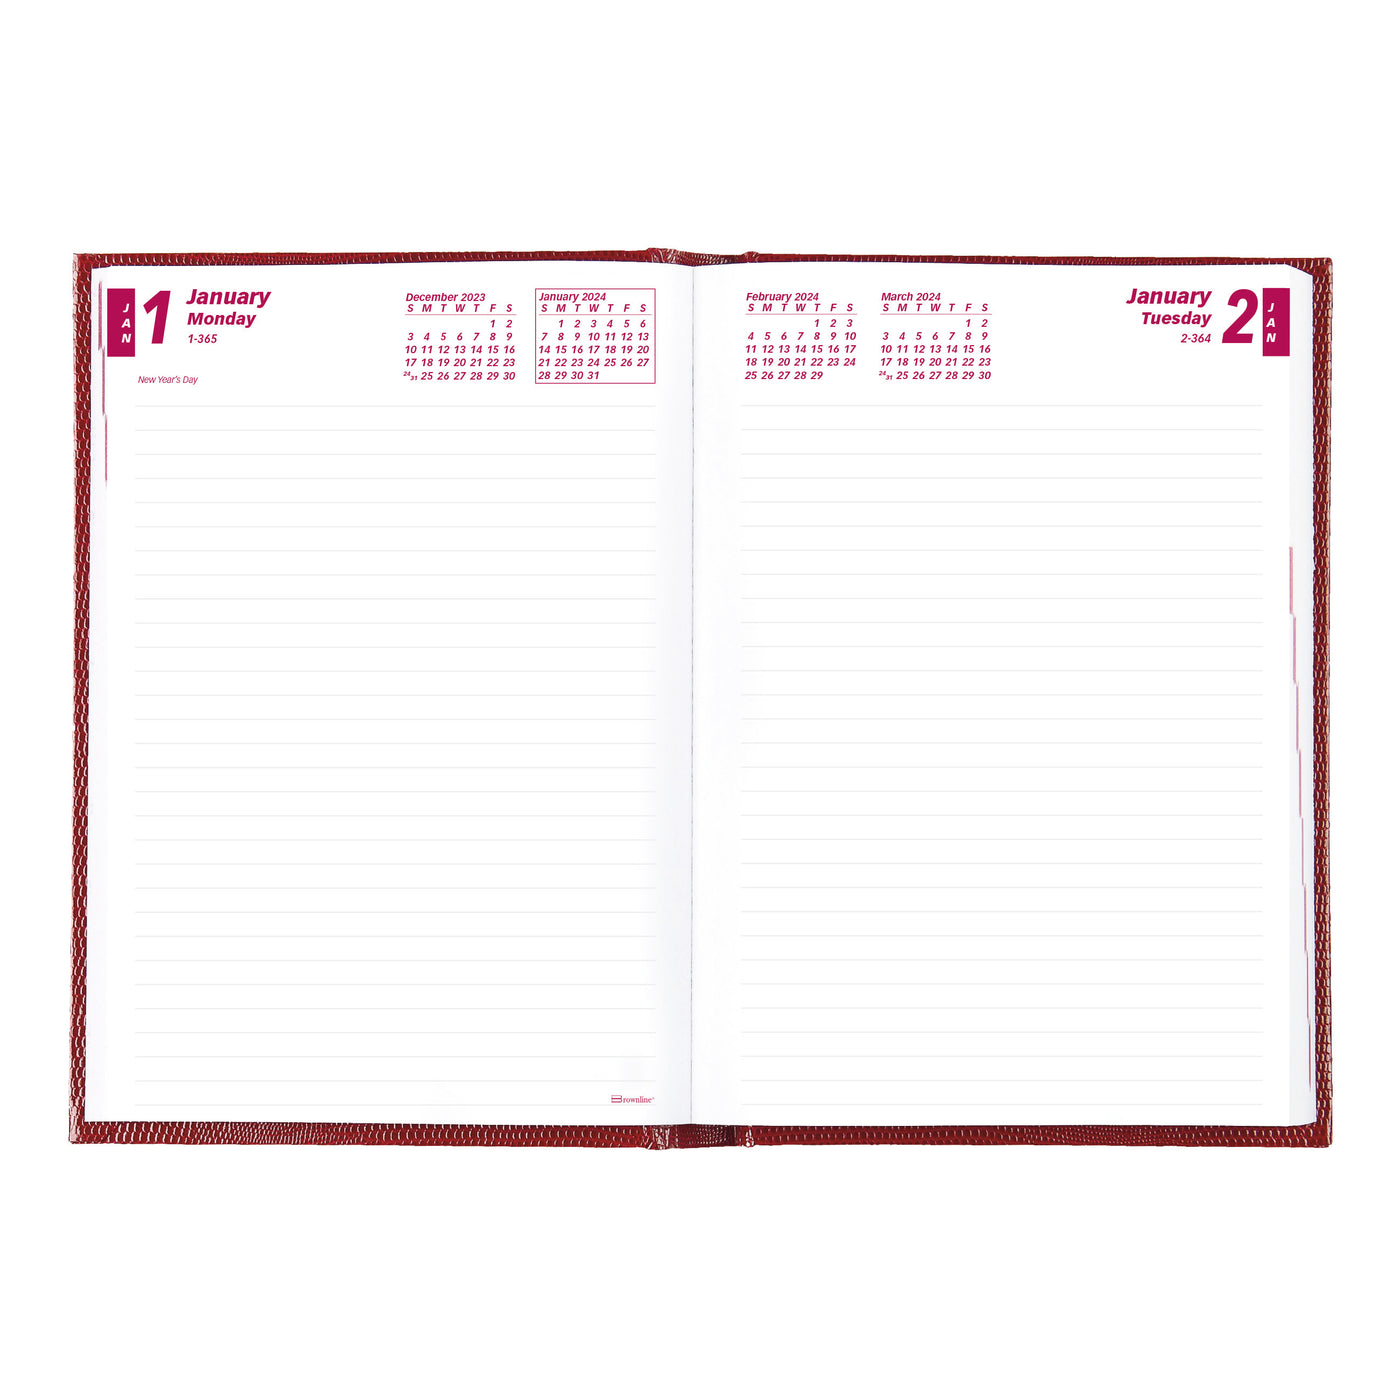 Brownline Daily Planner - 5 3/4" x 8 1/4" - Red Cover